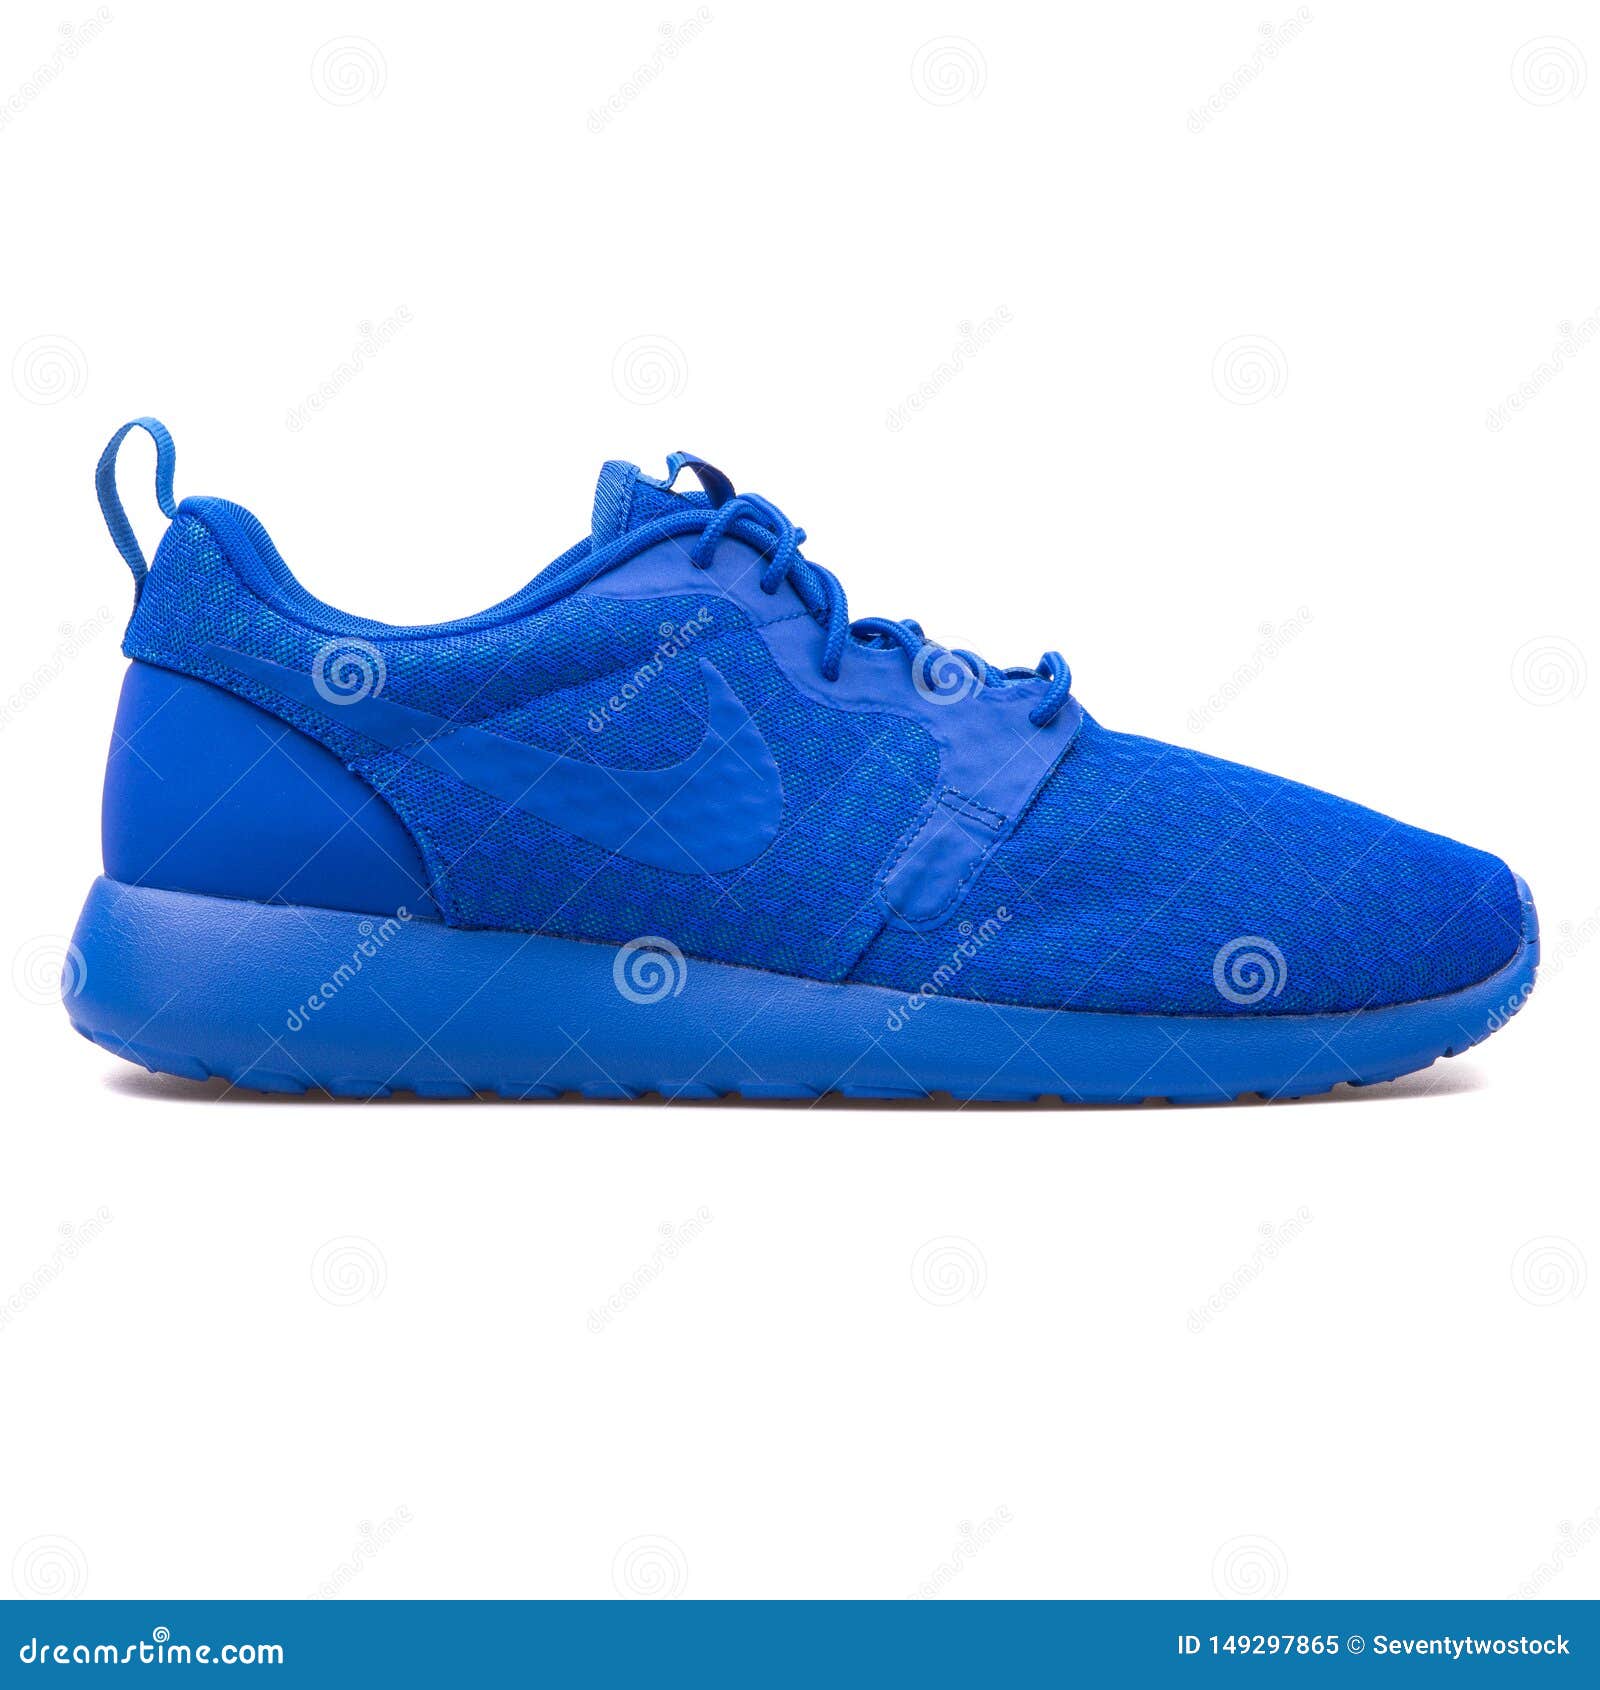 Nike Roshe One Hyp Blue Sneaker Editorial Image - Image of color, leather:  149297865